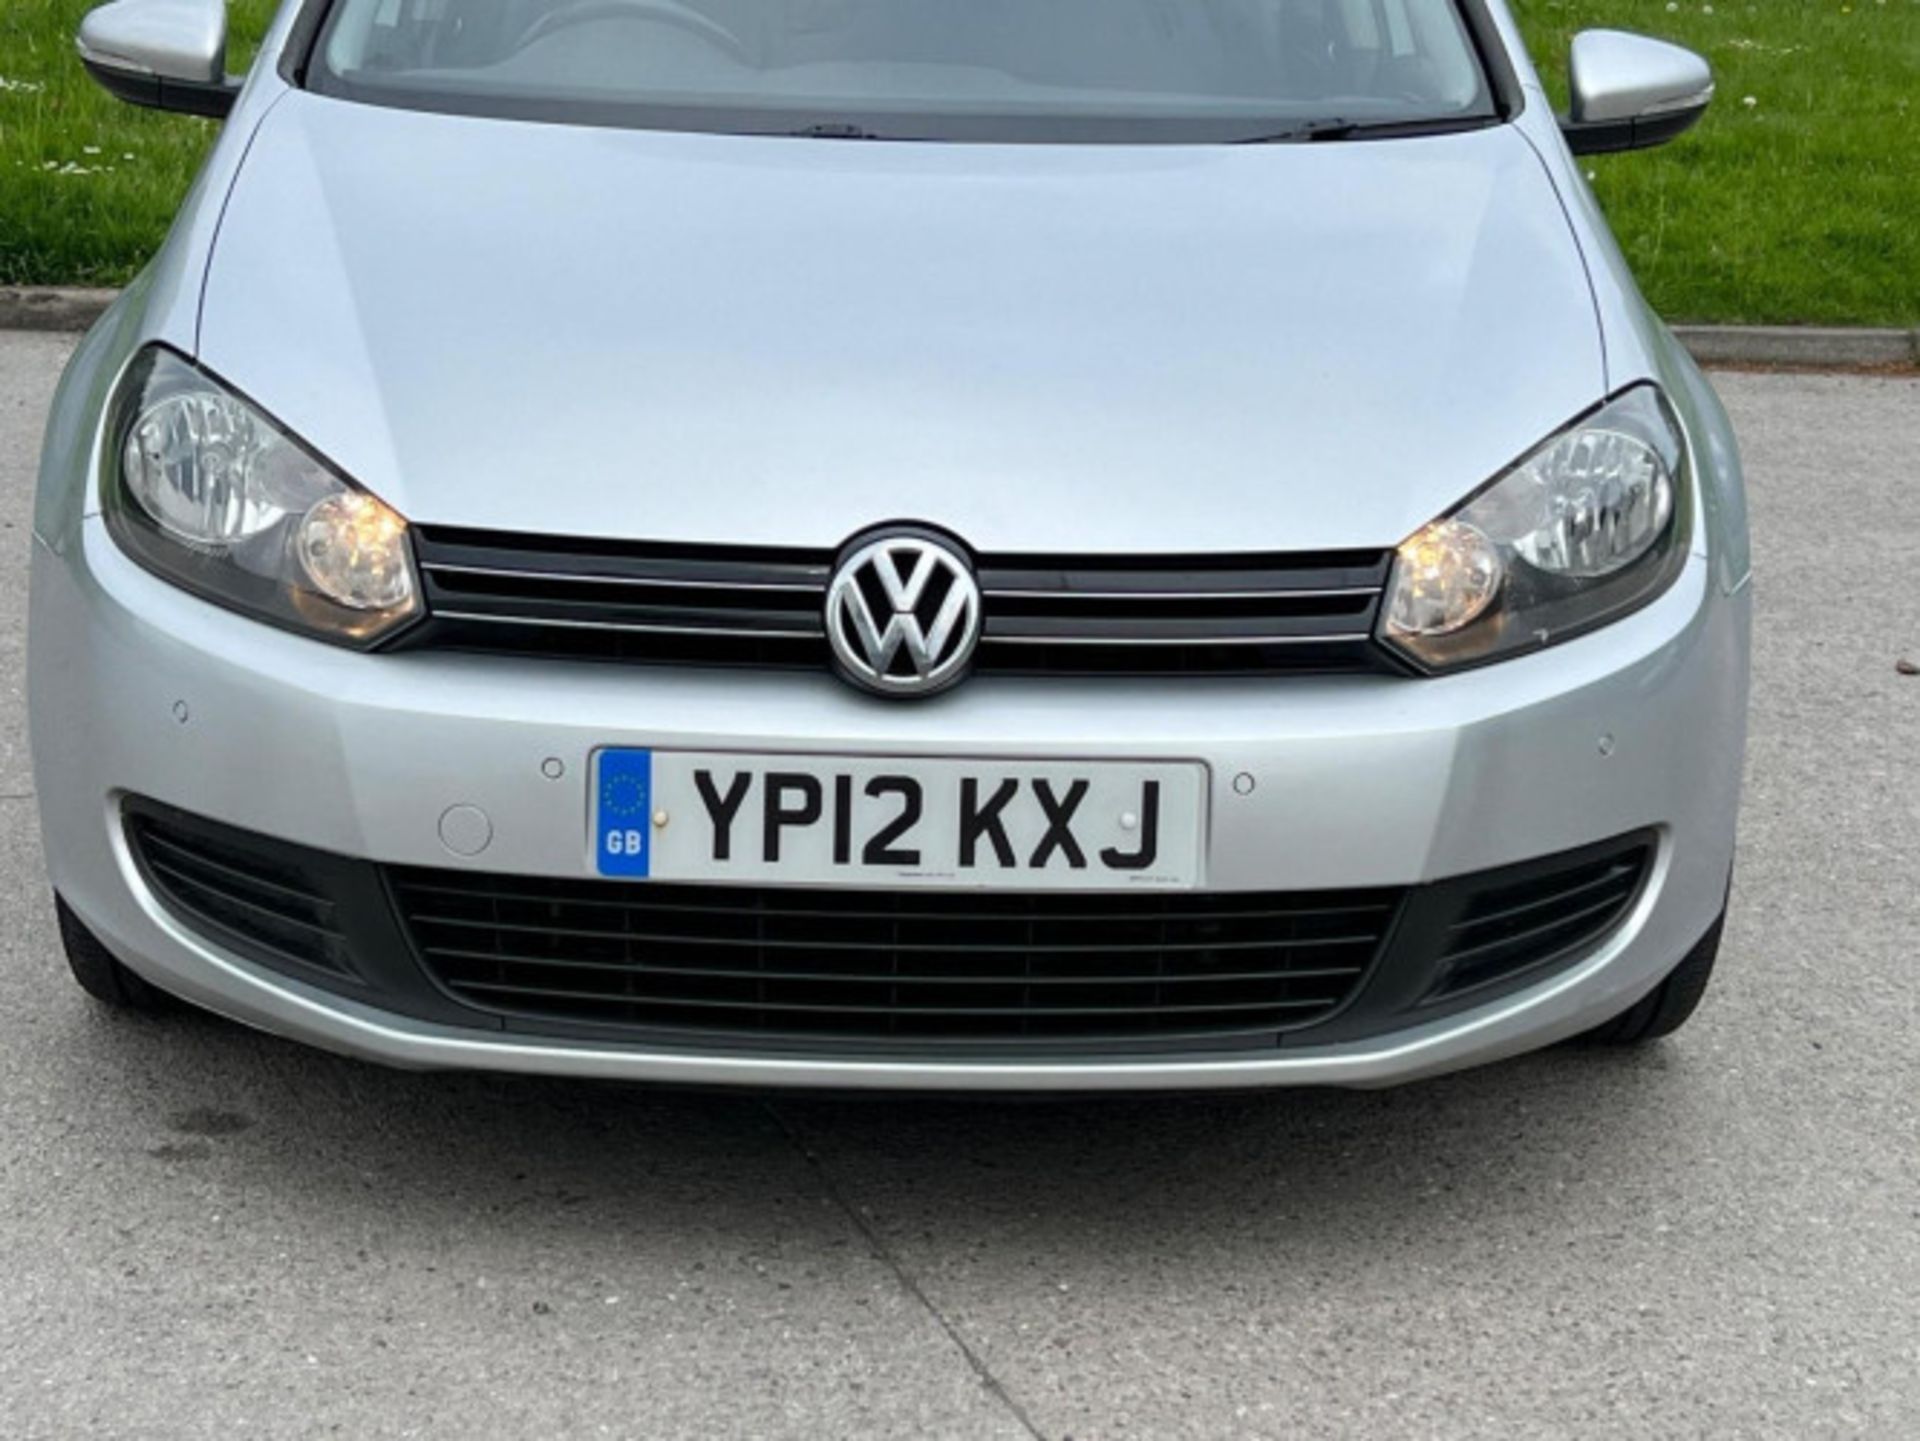 IMPECCABLE 2012 VOLKSWAGEN GOLF 1.6 TDI MATCH >>--NO VAT ON HAMMER--<< - Image 5 of 116